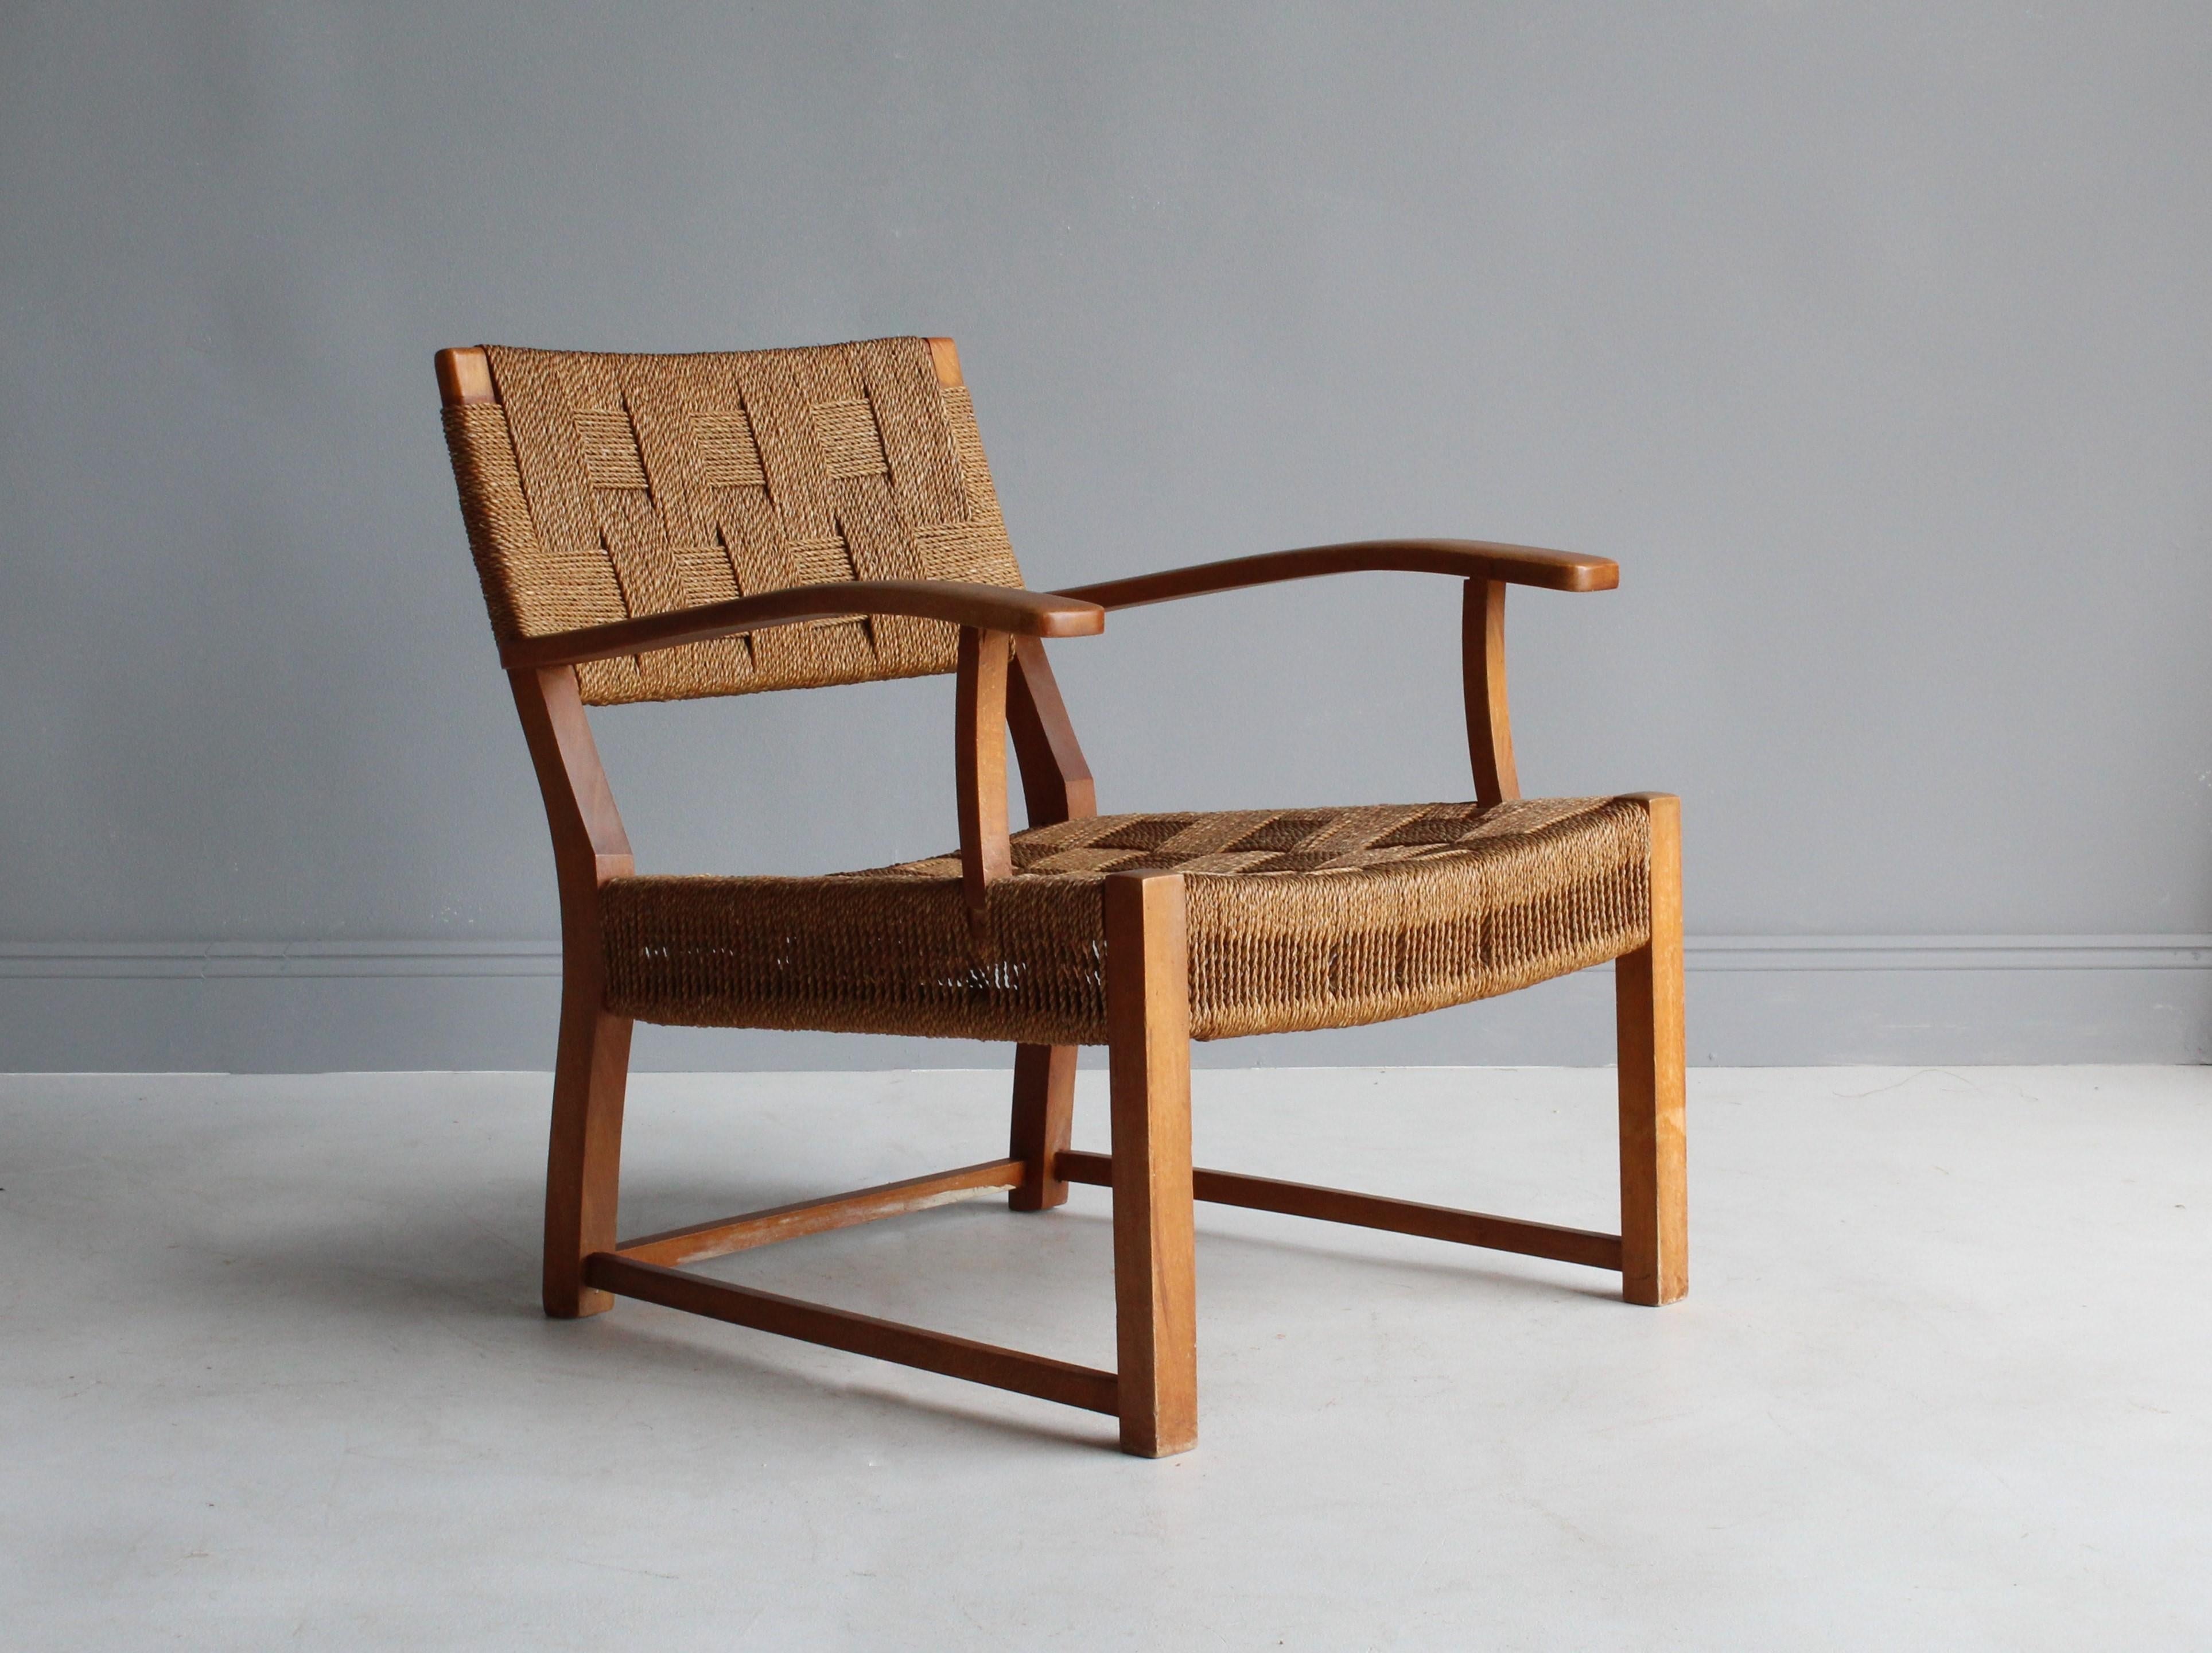 A modernist lounge chair or armchair attributed to Danish architect and designer, Frits Schlegel. Frame made of stained birch, bears original seagrass cord.

Other Nordic designers of the period include Kaare Klint, Edvard Kindt-Larsen, Vilhelm